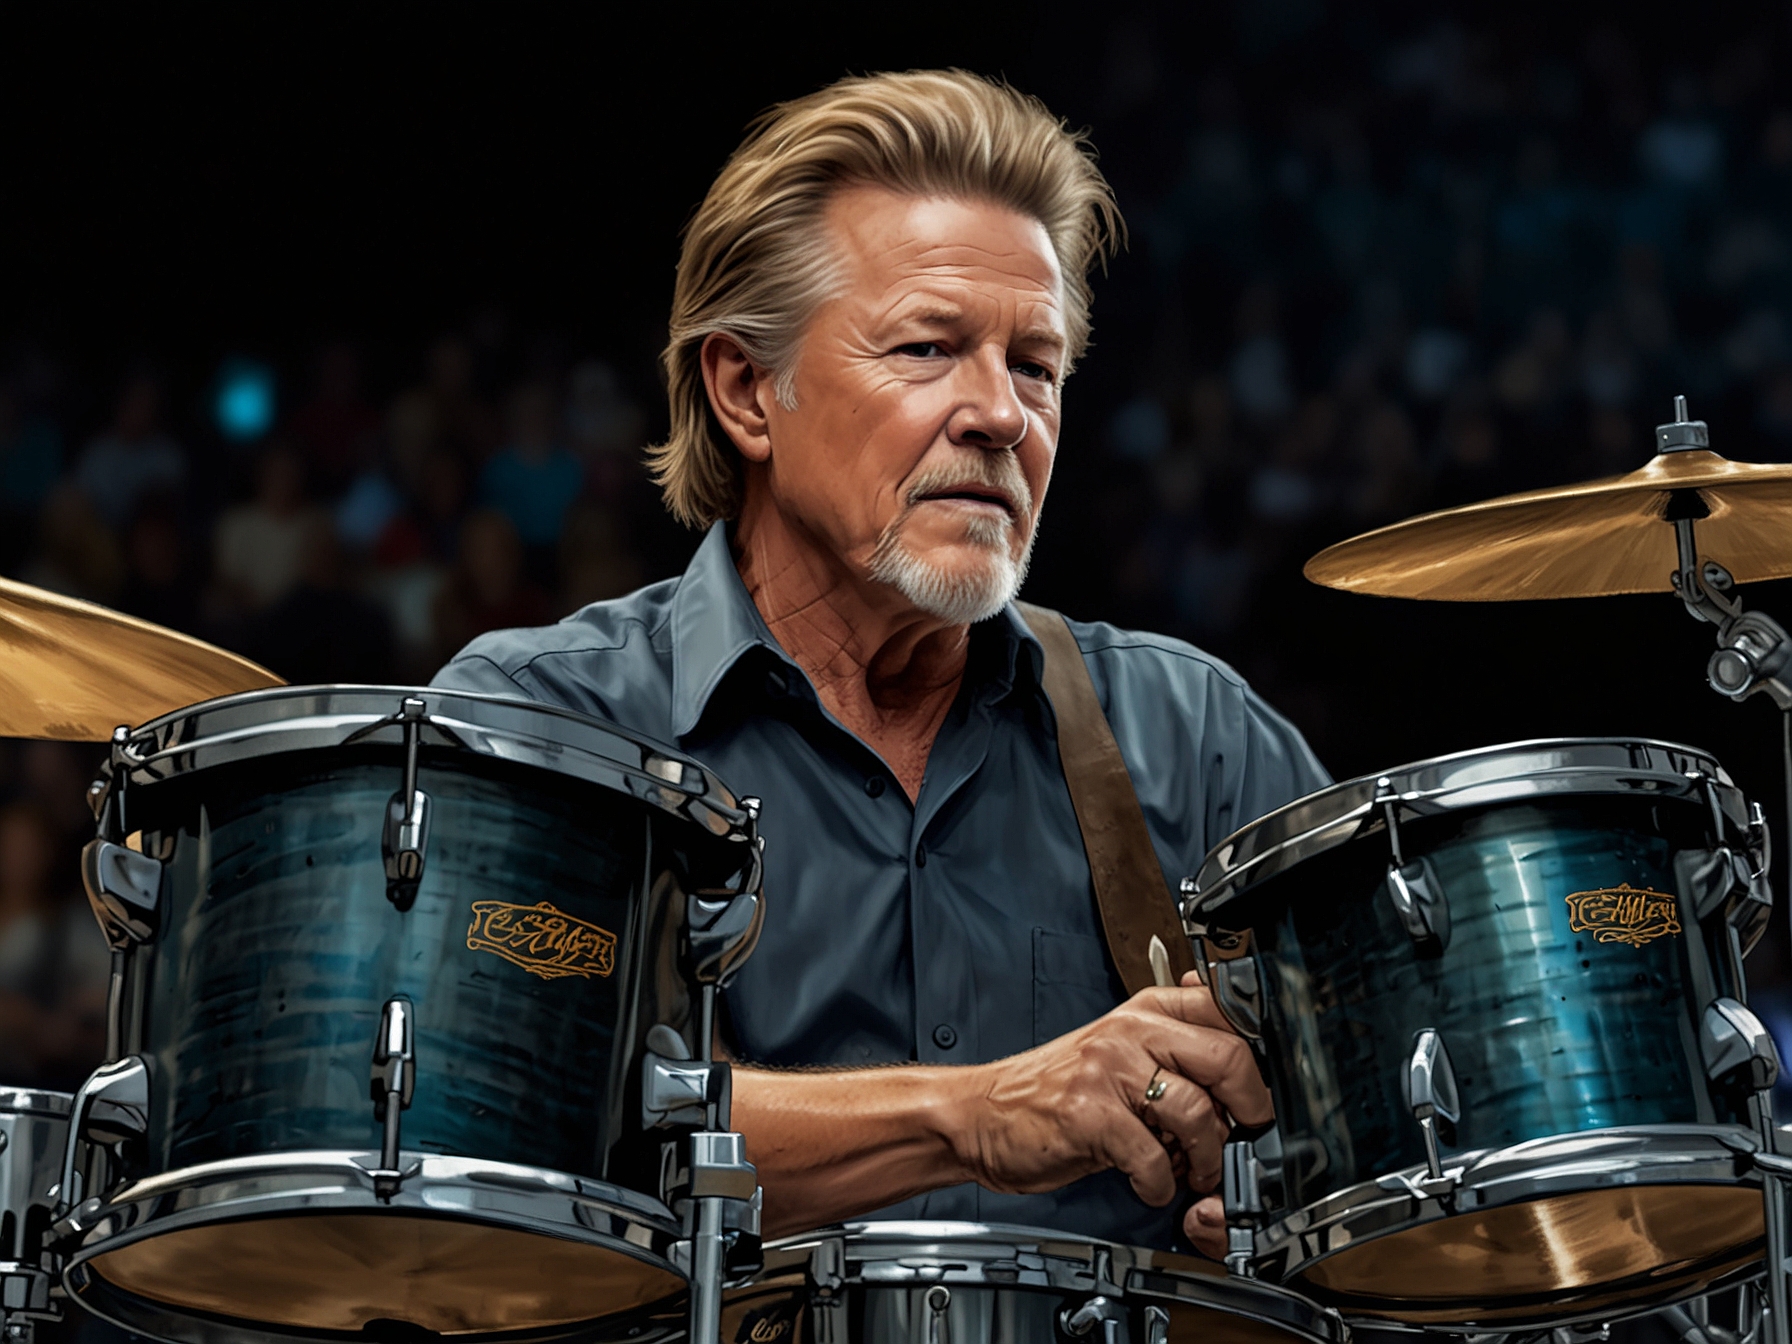 An image showing Don Henley passionately playing the drums during a live Eagles concert, symbolizing his deep connection and contribution to the band's legendary status.